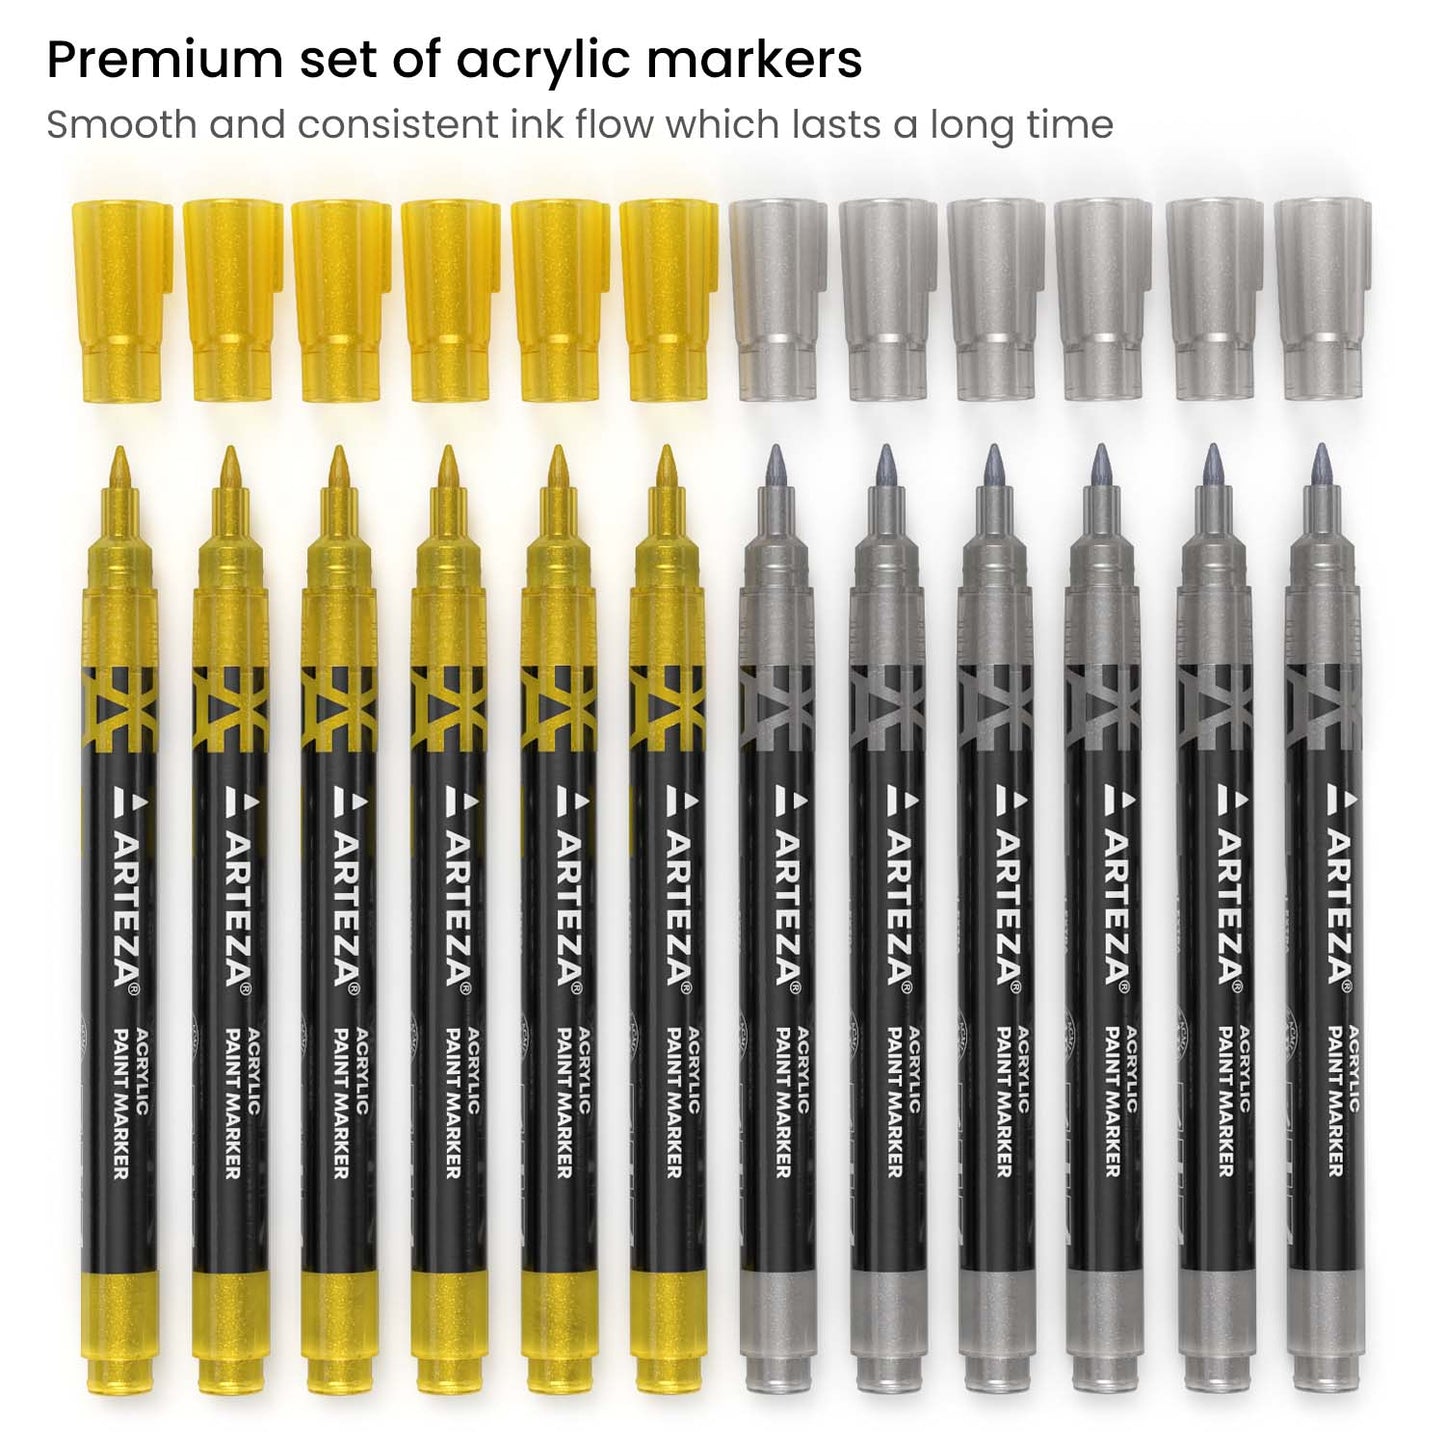 Premium Set Acrylic Markers Metallic Silver and Gold